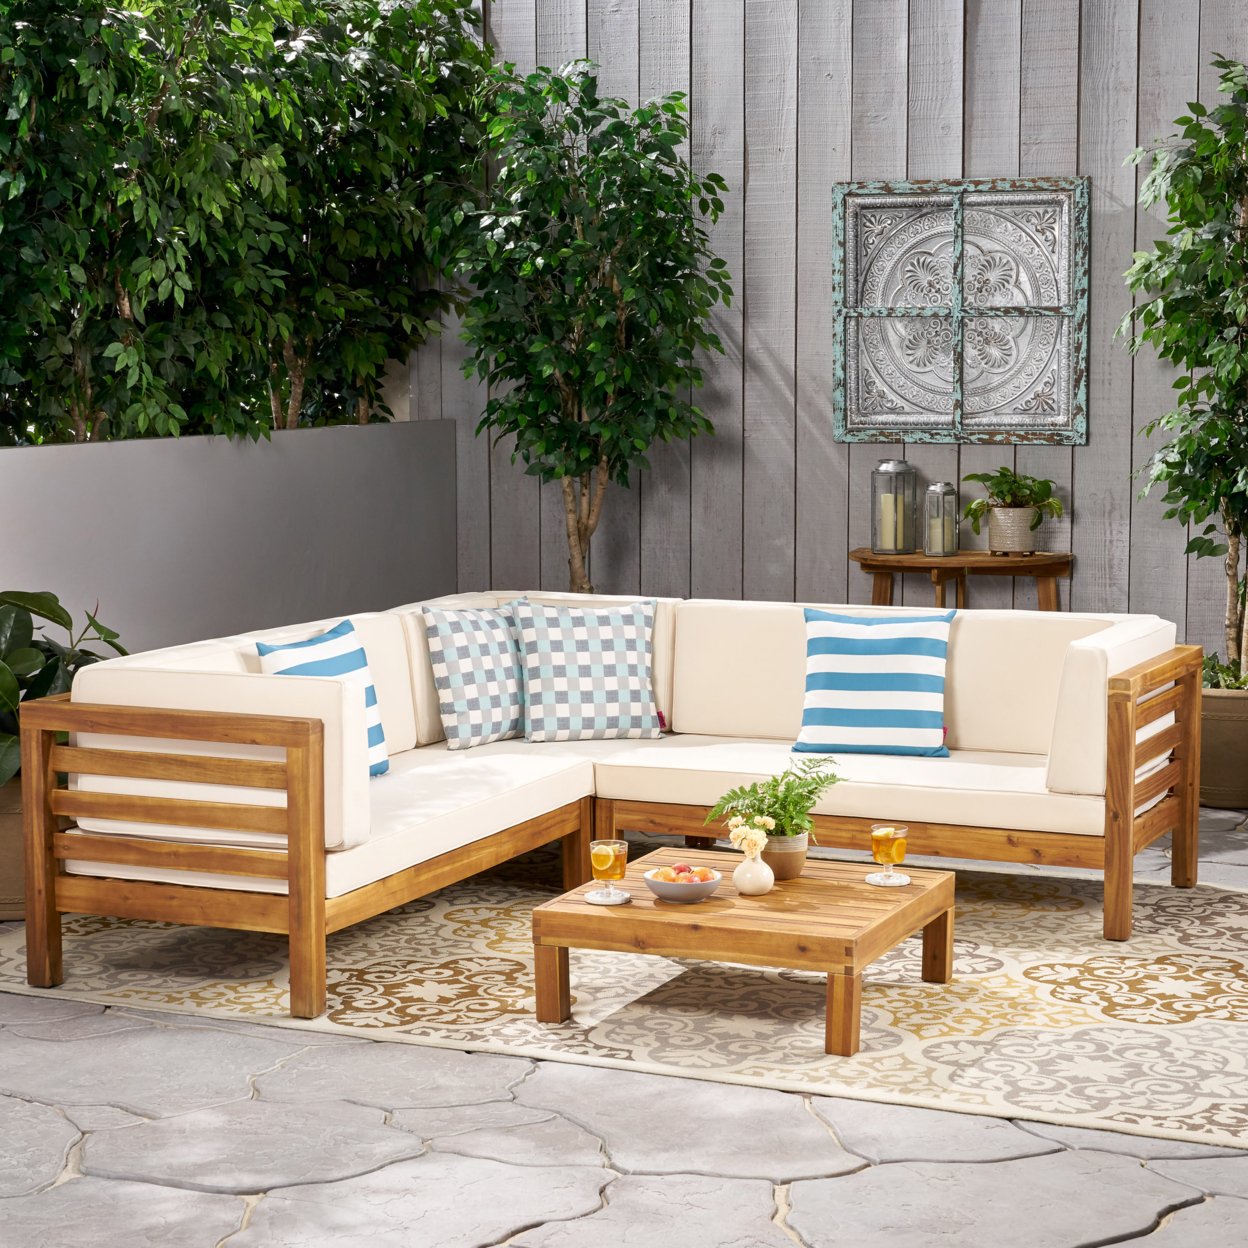 Ravello 4 Piece Outdoor Wooden Sectional Set With Dark Grey Cushions - Beige, Natural